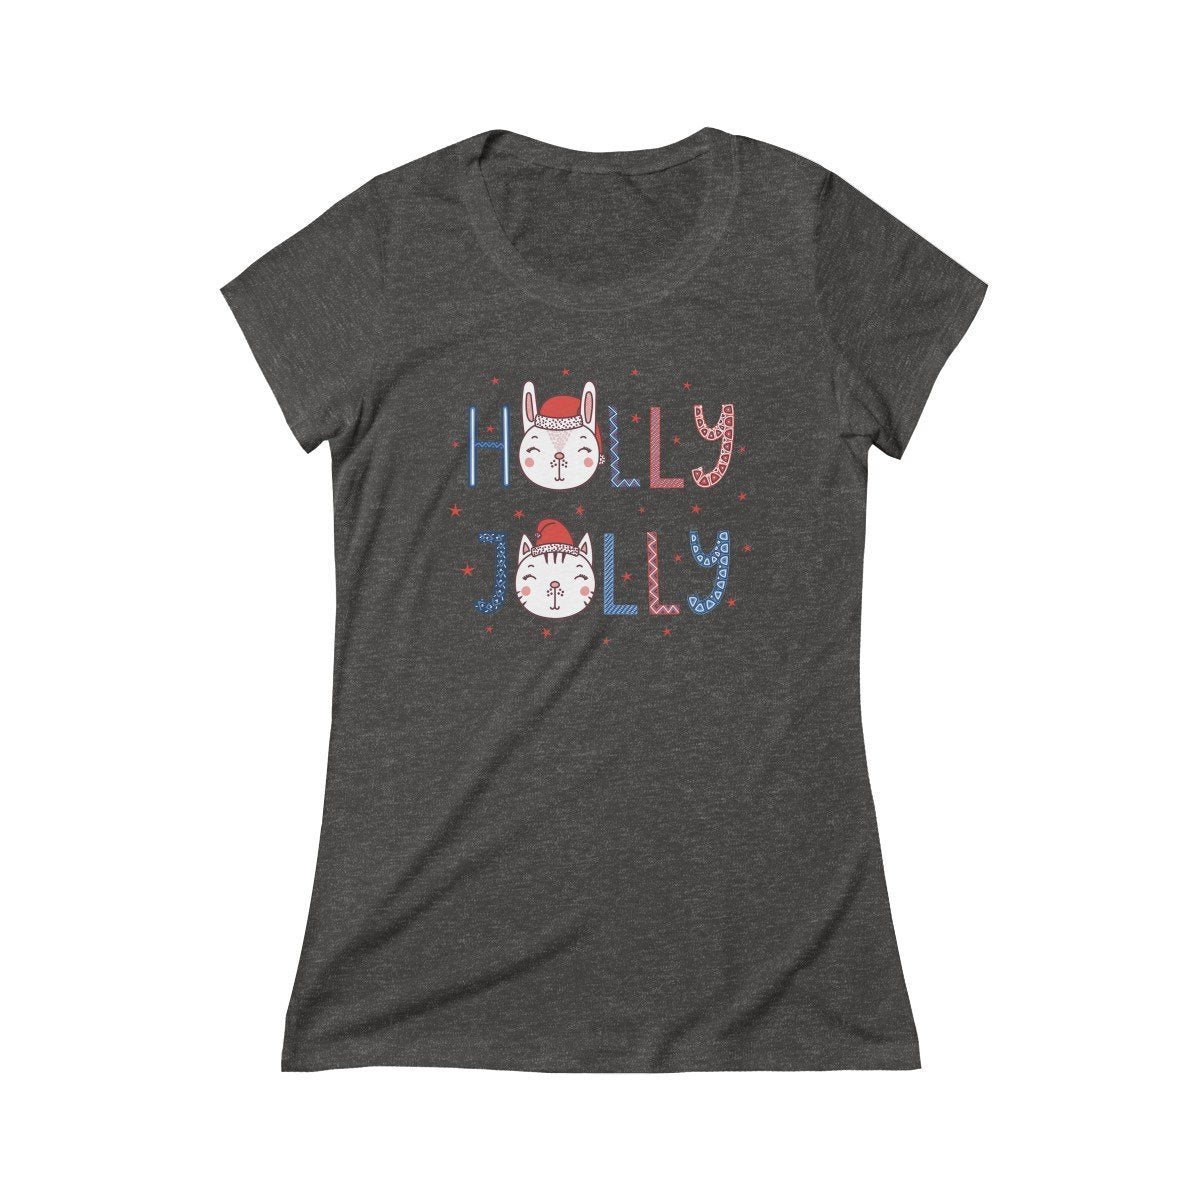 Christmas Gifts for Cat Lovers, Christmas Cat T-Shirt with the Print "Holly Jolly" and a Cute Cat Face